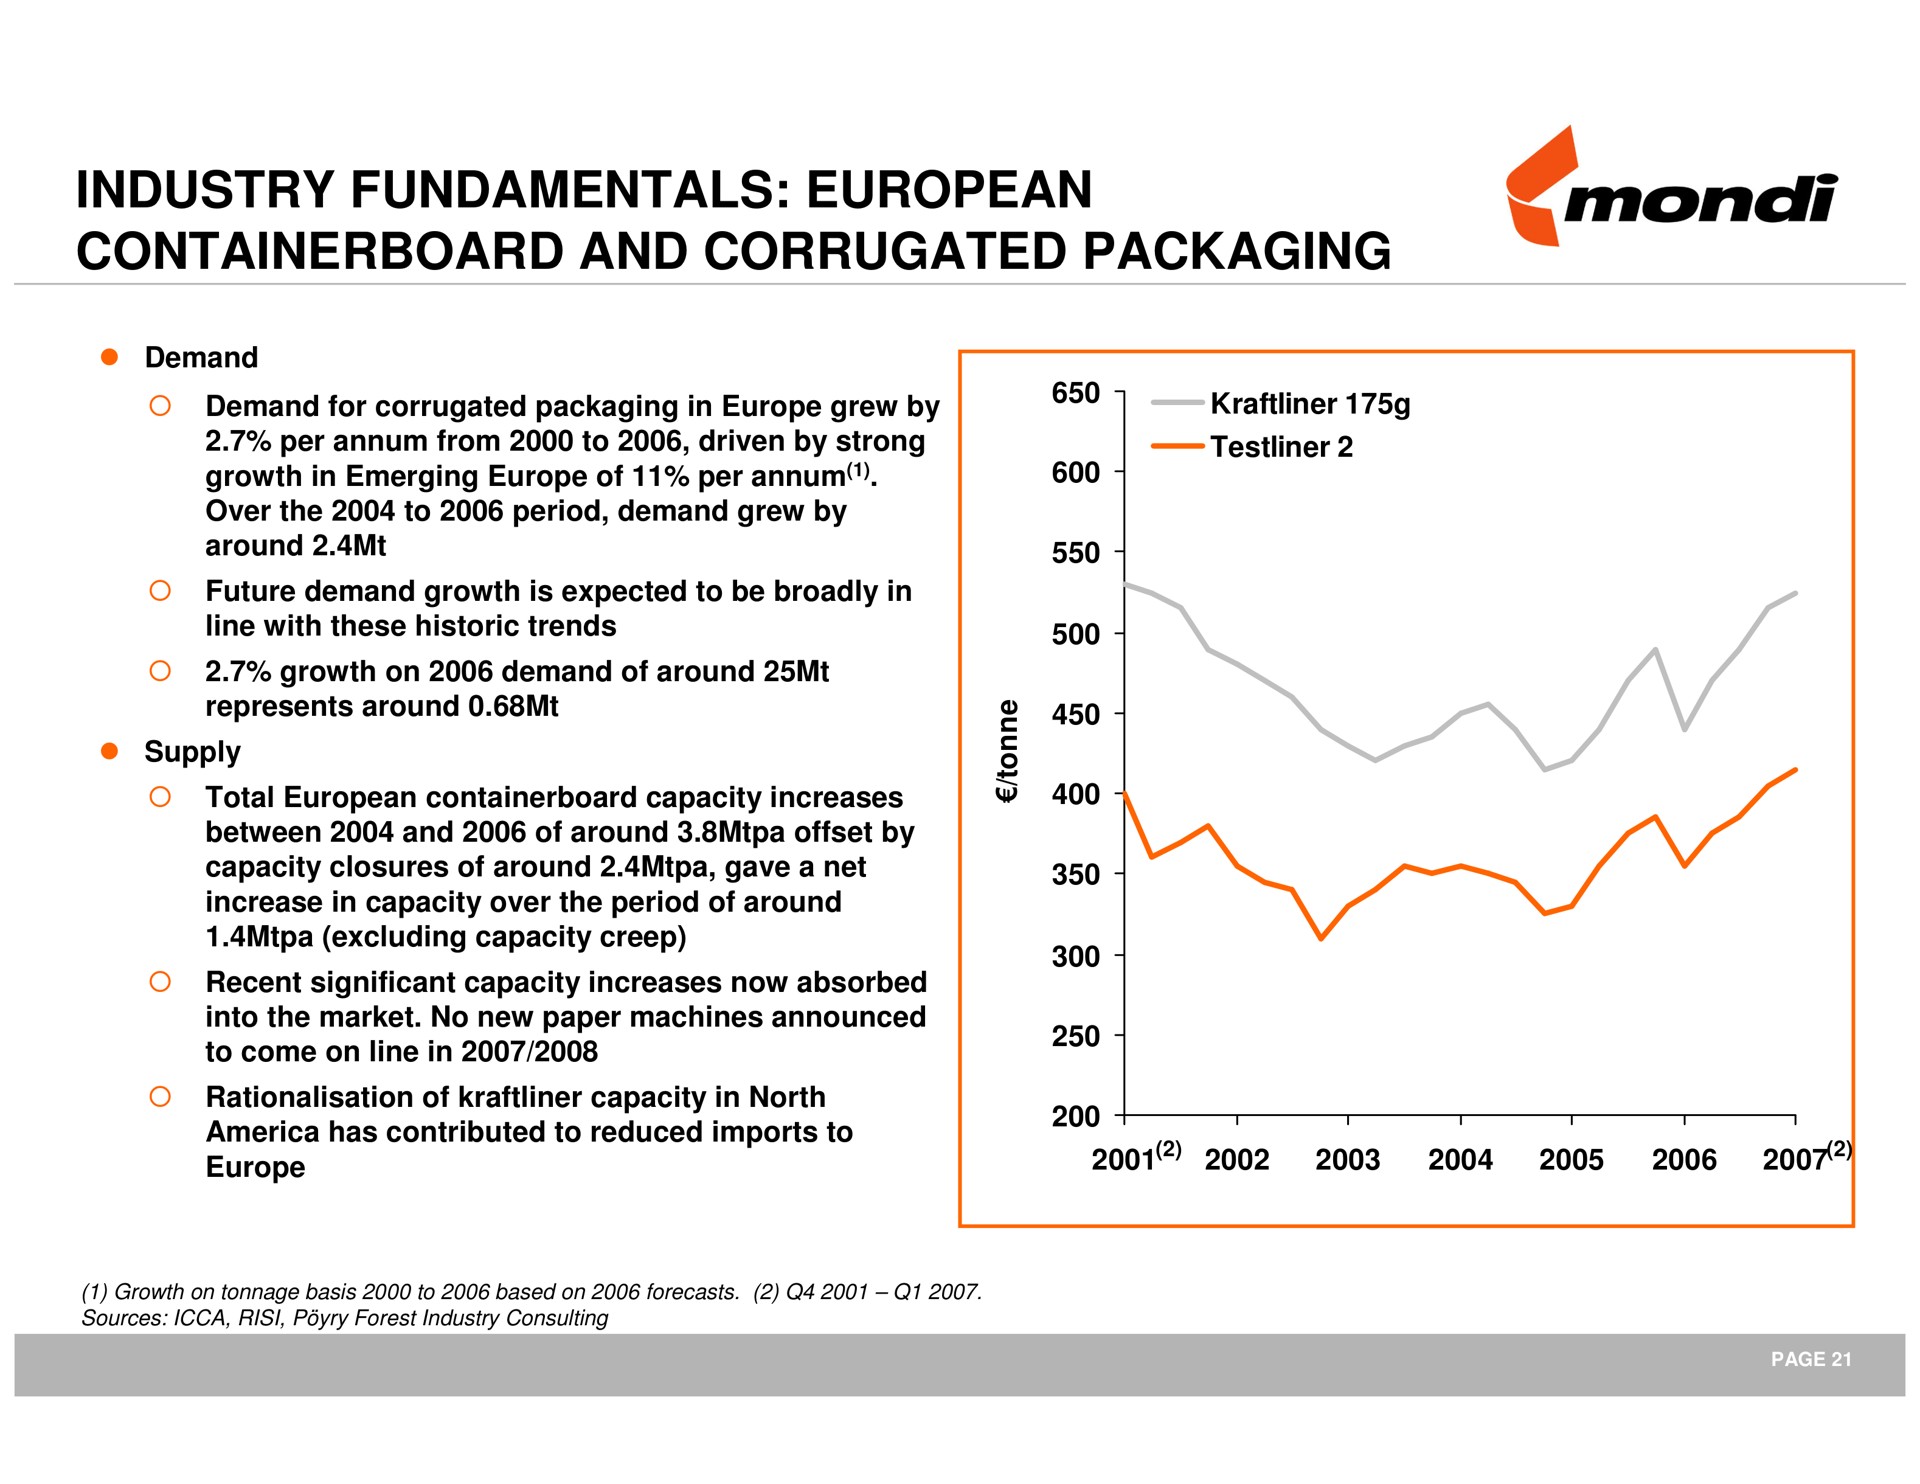 industry fundamentals and corrugated packaging | Mondi